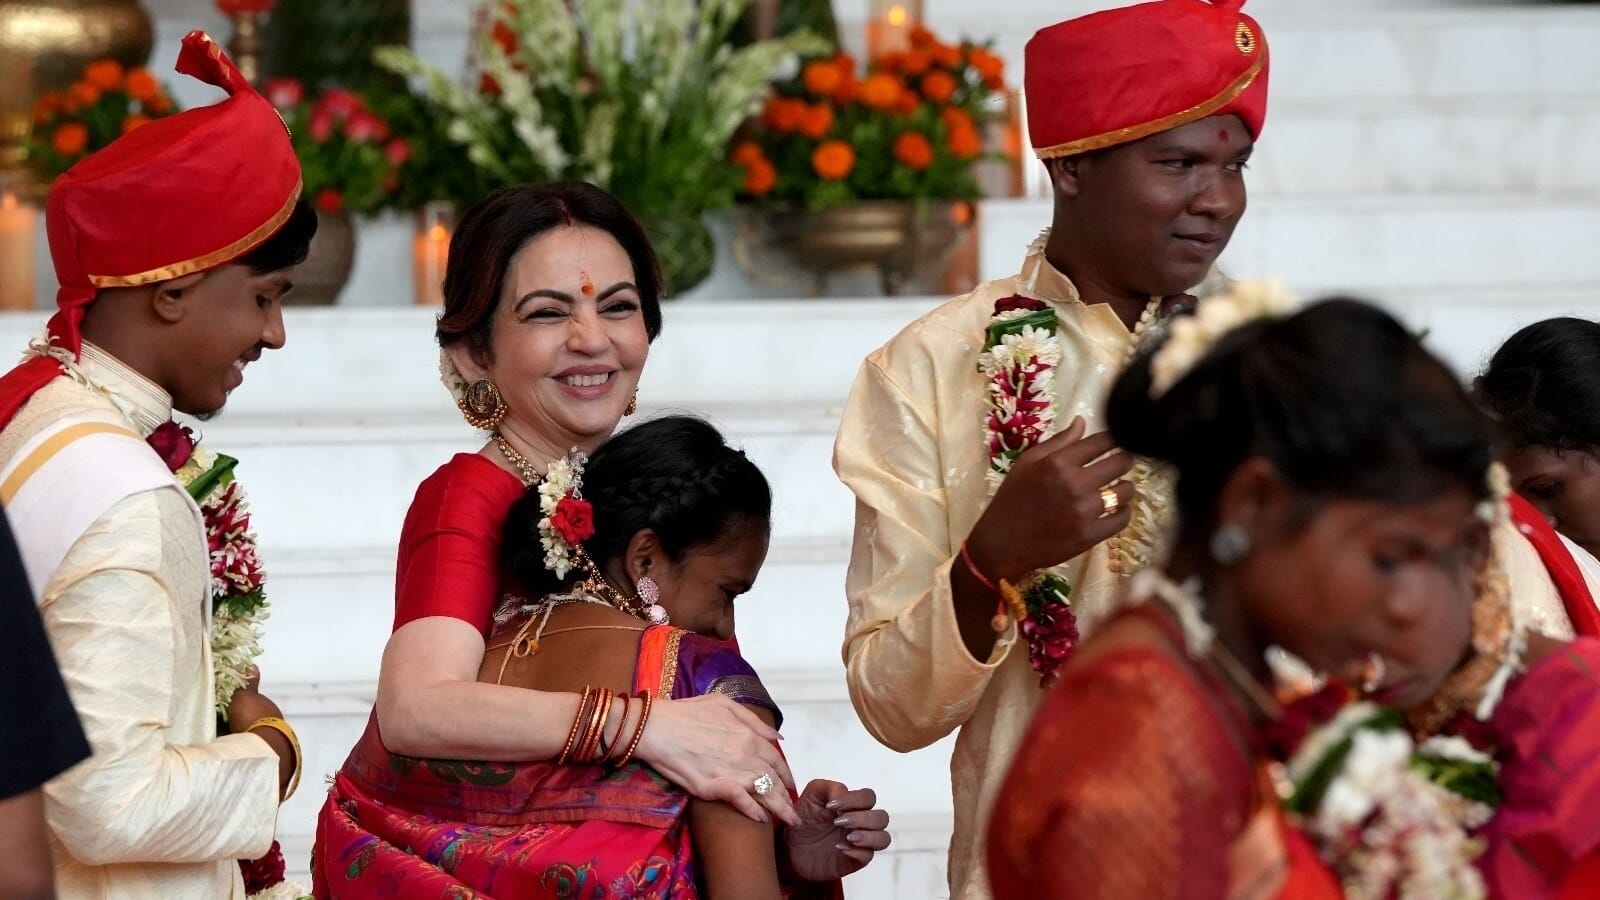 5 photos of Ambanis as billionaire family hosts mass wedding for over 50 couples